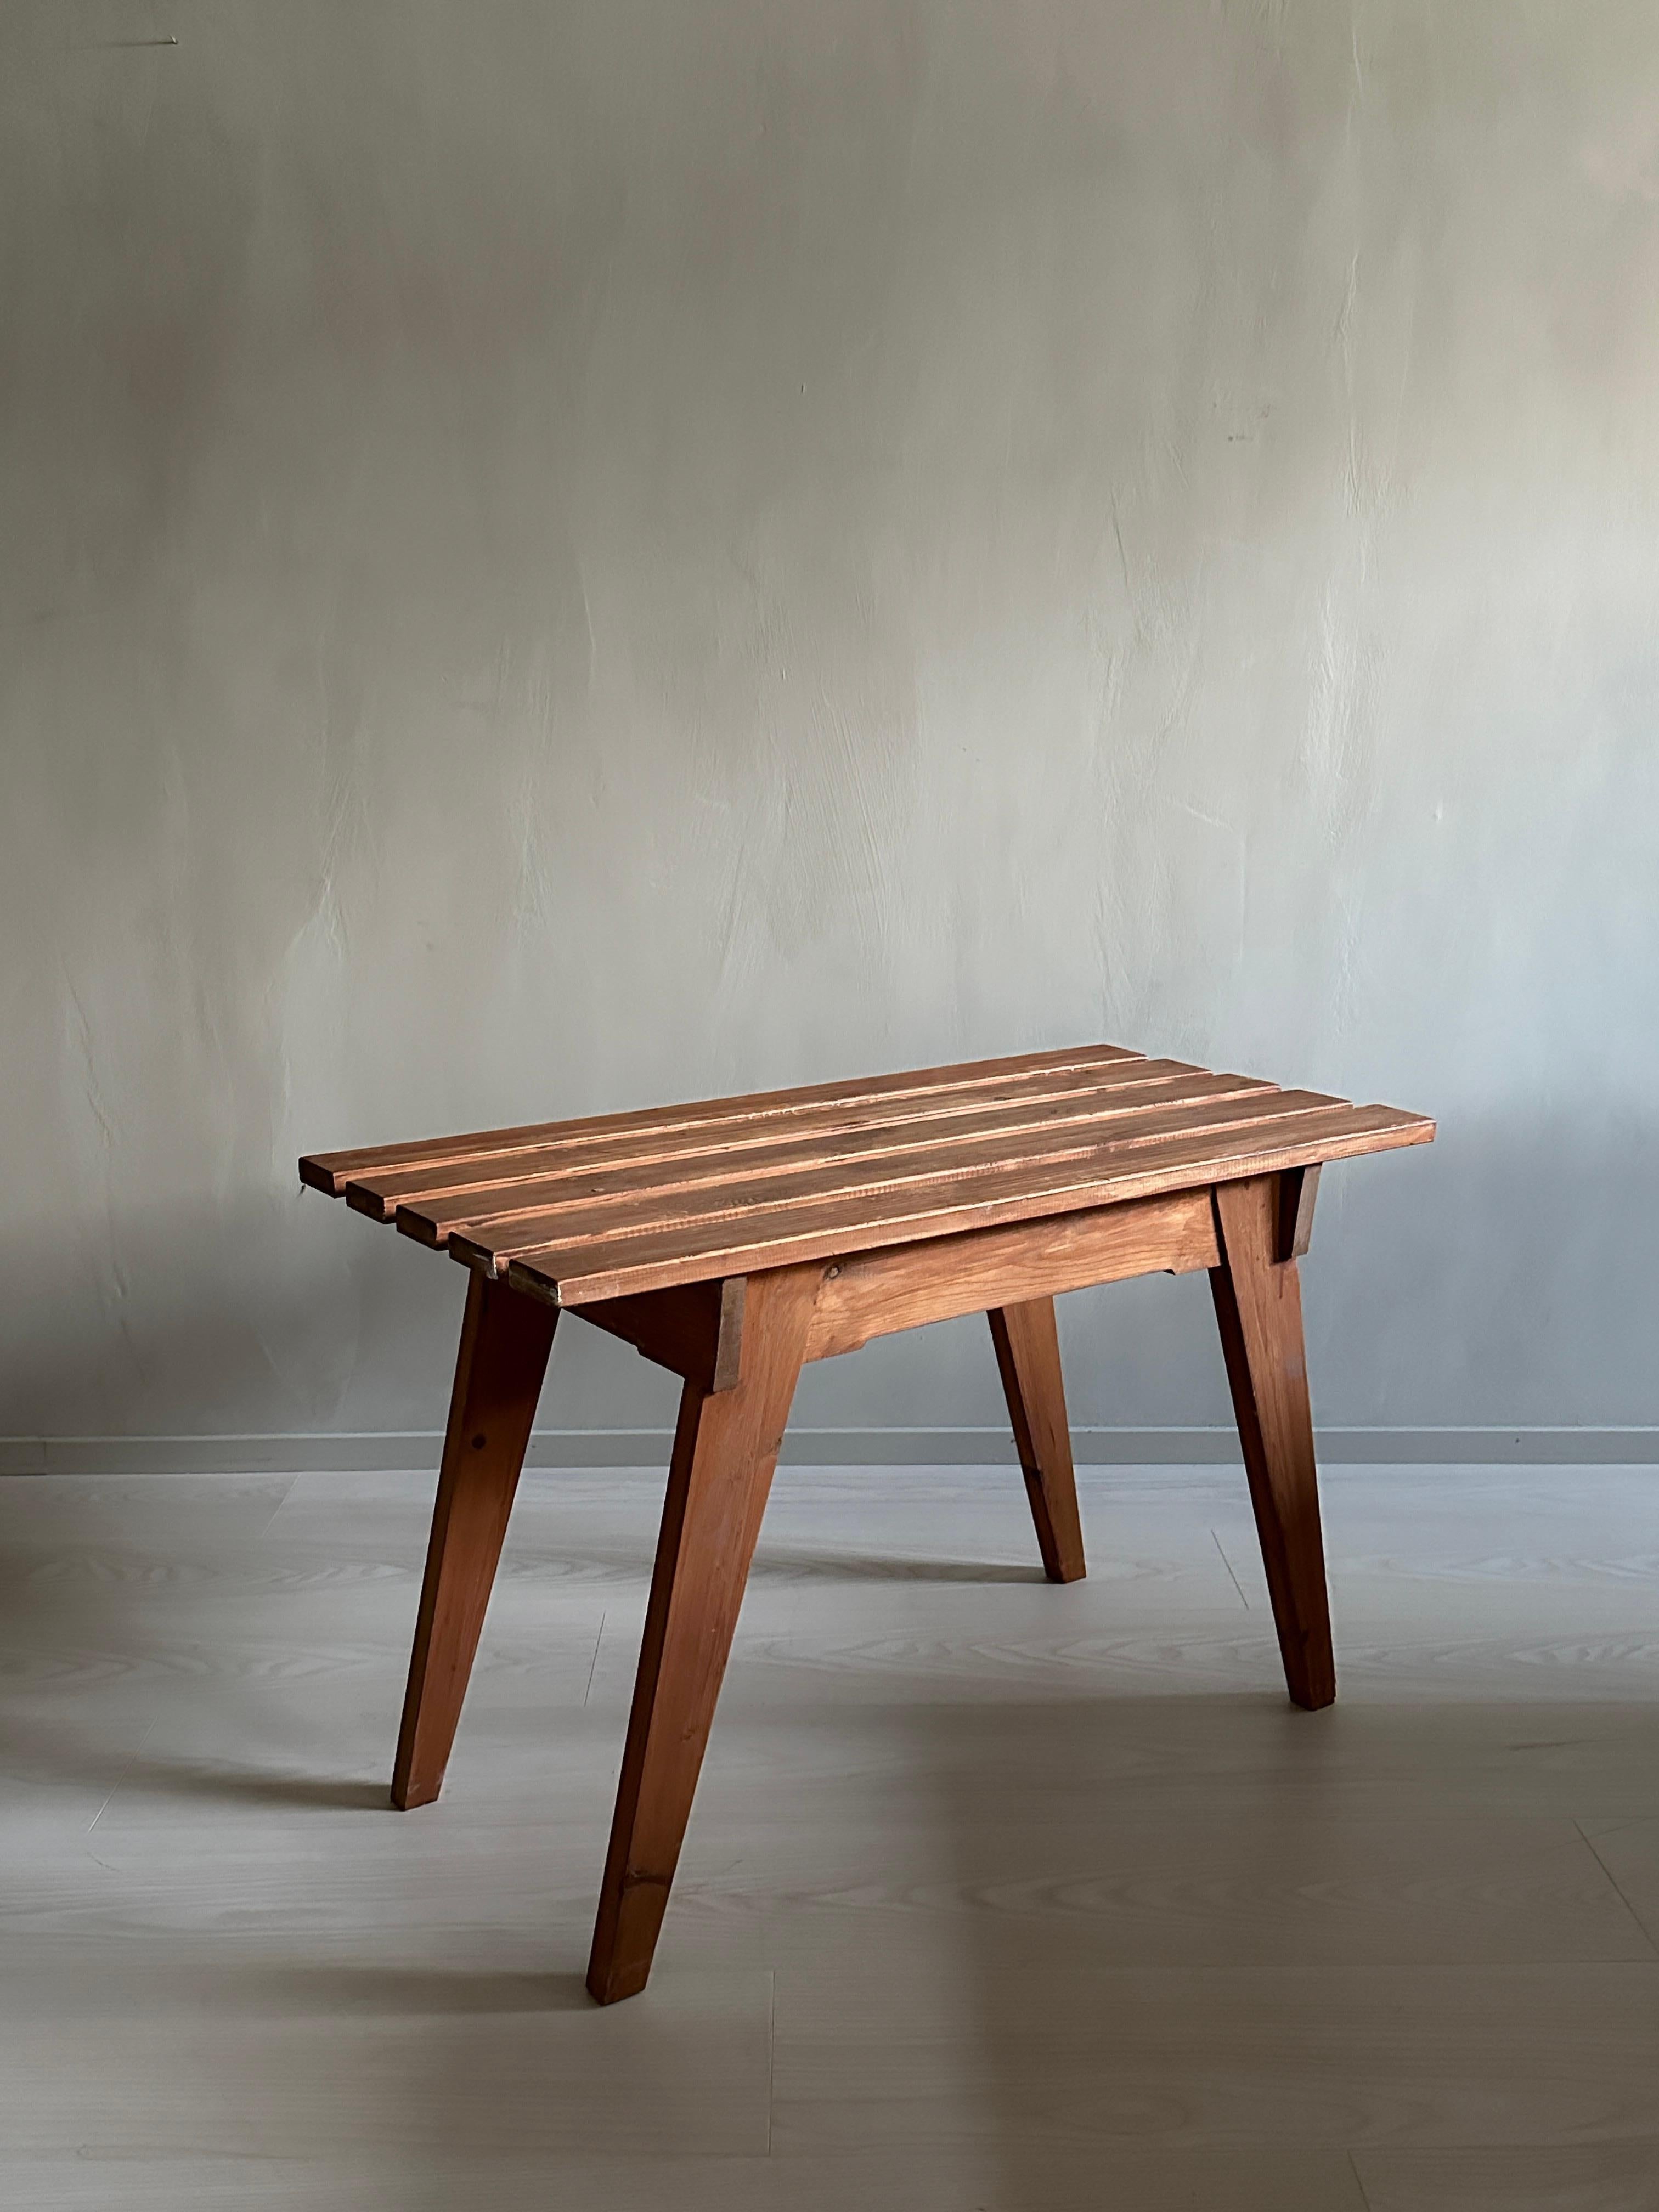 French Mid-Century Side Table, Massive Pinewood, France c. 1960s For Sale